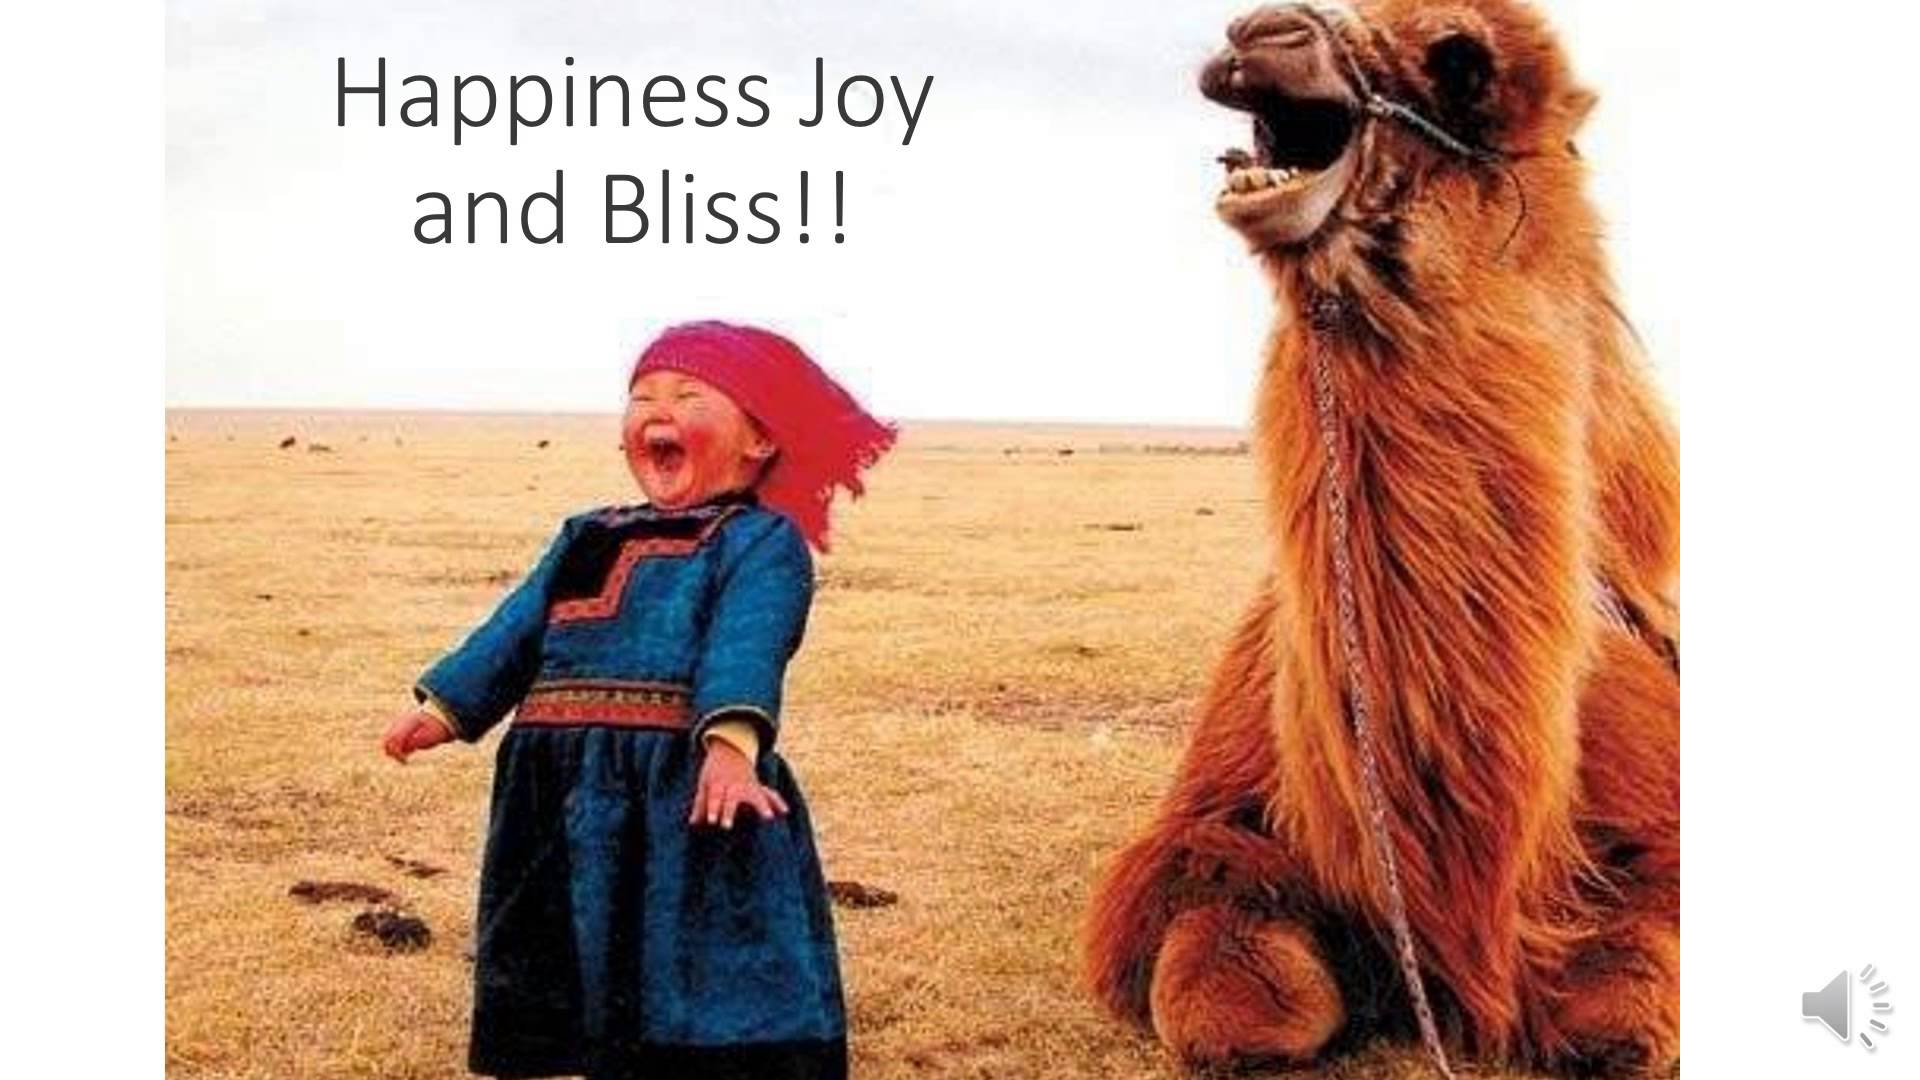 bliss camel and child